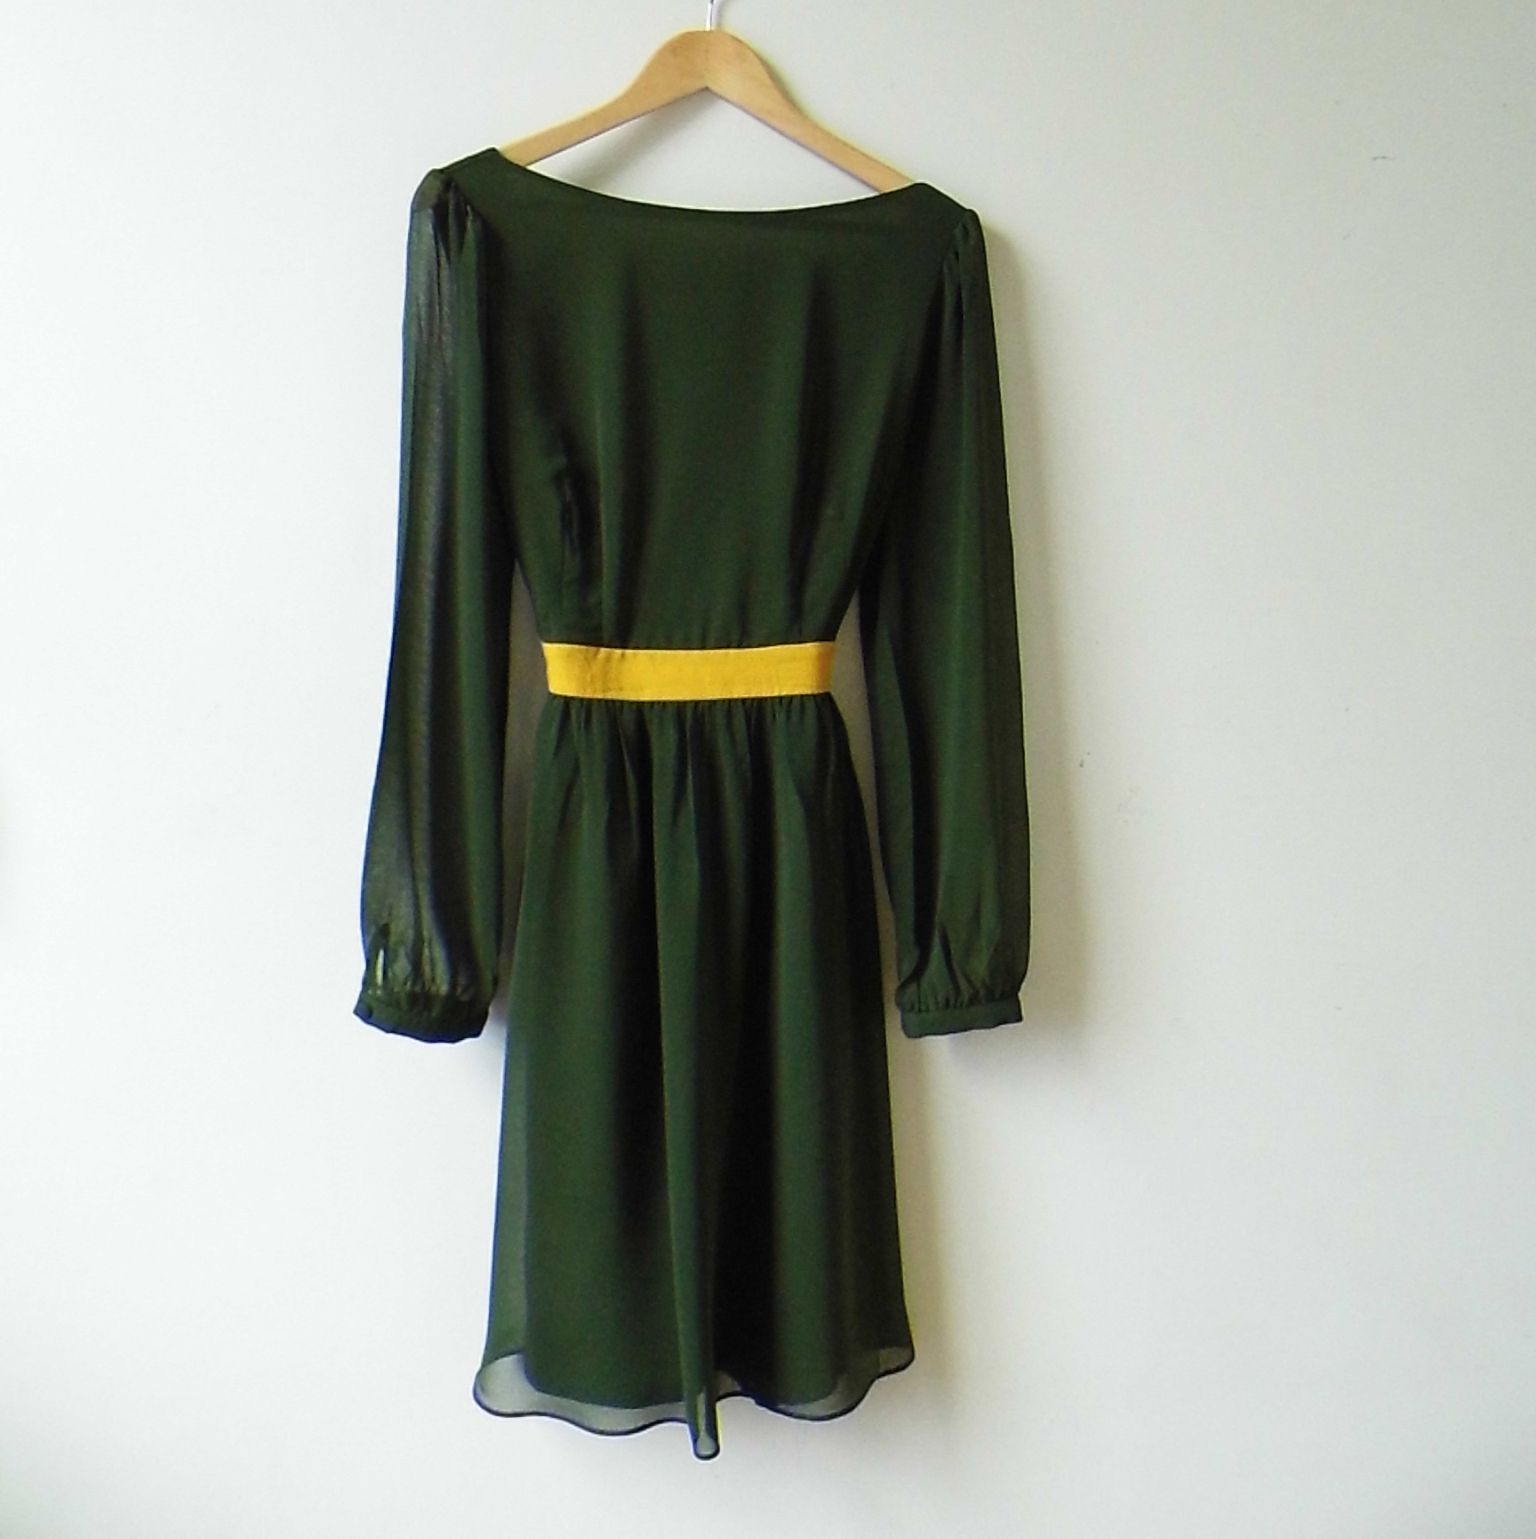 Green cocktail dress sleeves yellow band